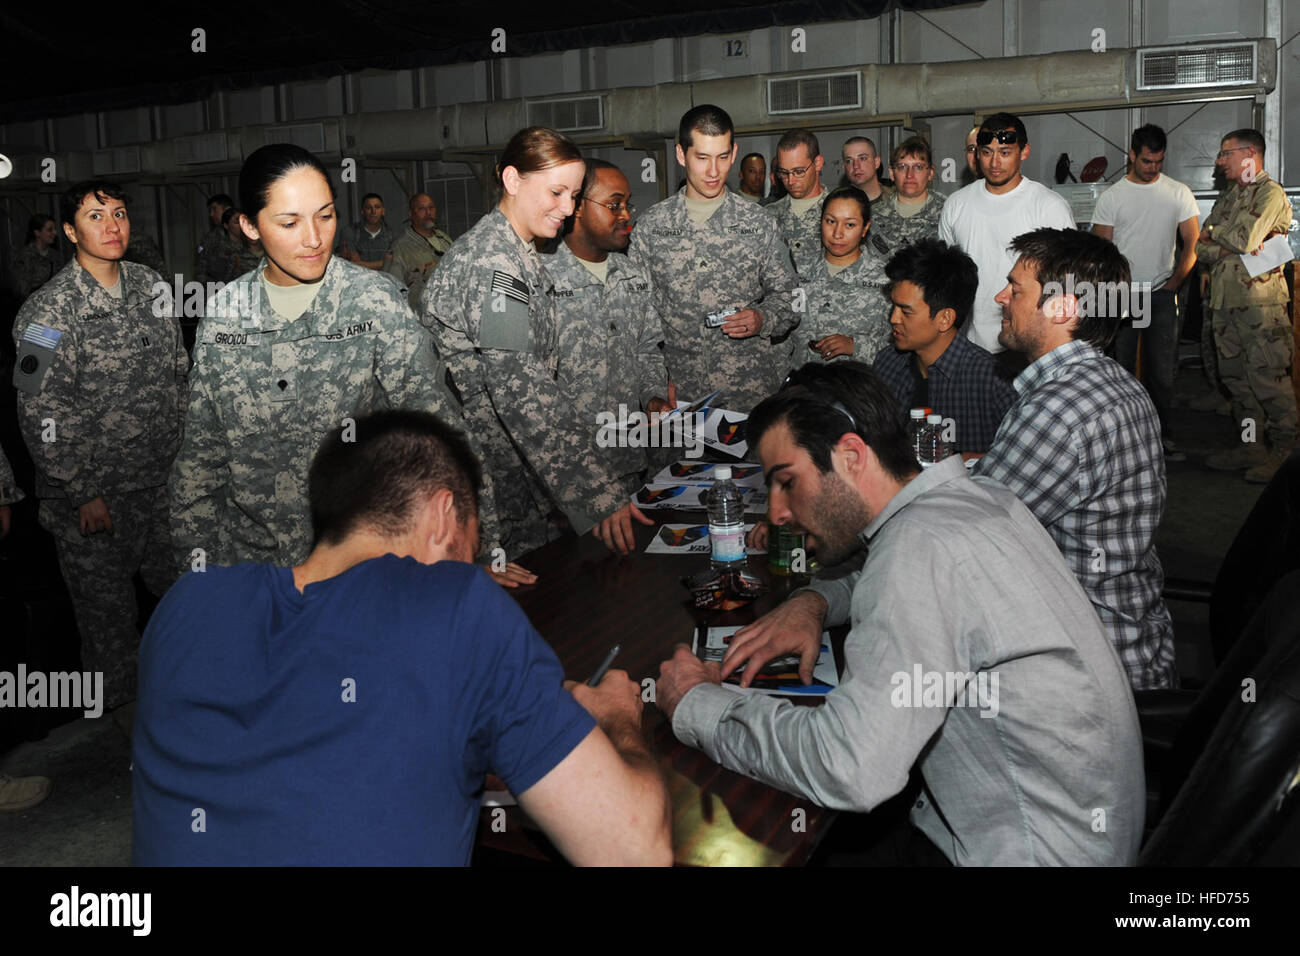 Cast members from the new Star Trek movie Chris Pine (from left), Zachary Quinto, Karl Urban and John Cho sign autographs on a base in the Middle East on April 11. The cast spent the day meeting with military personnel from the different bases. Star Trek cast 1 Stock Photo